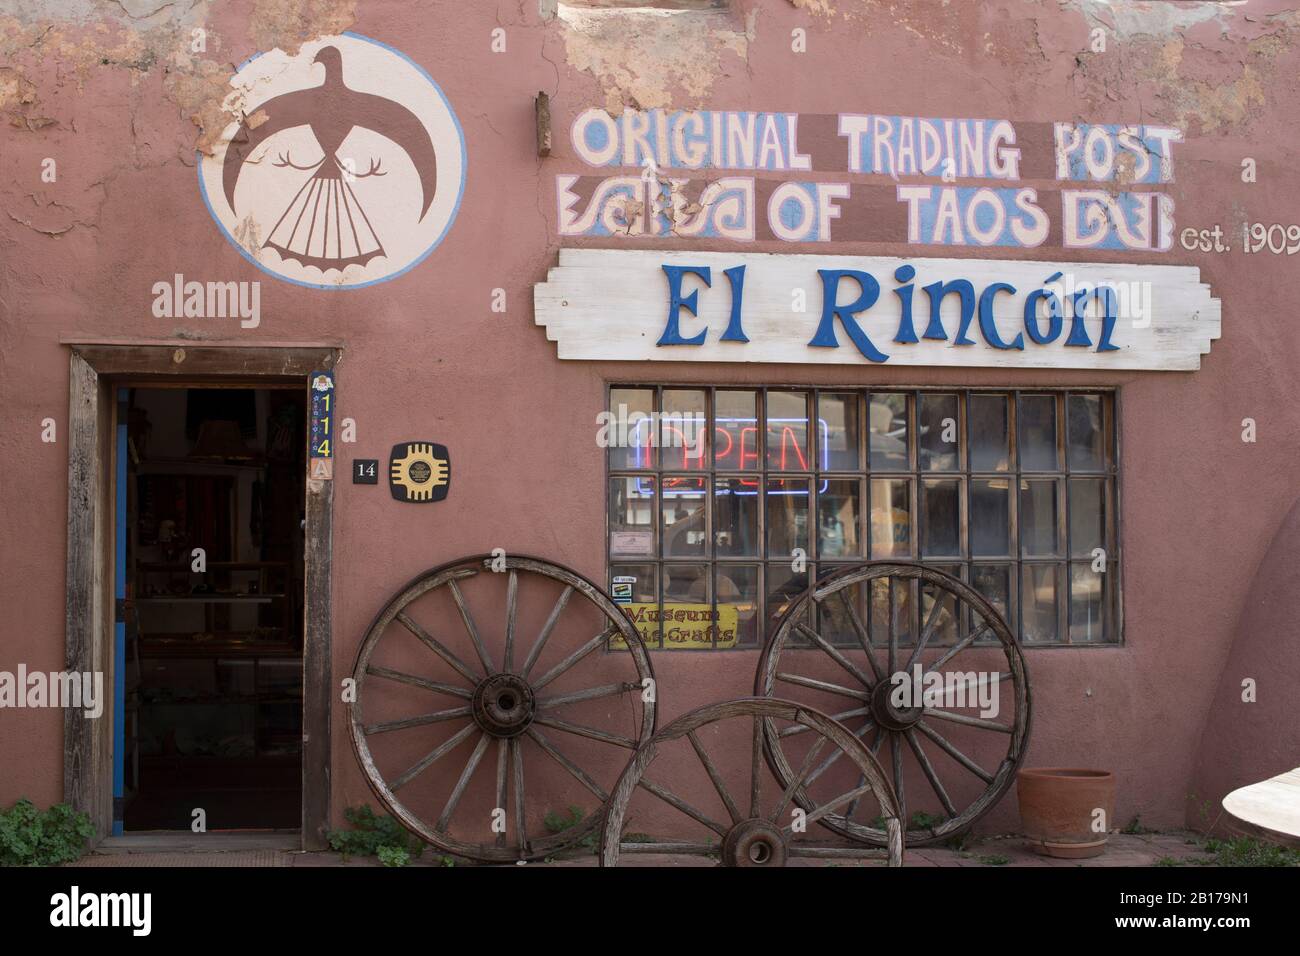 Oldest trading post in Taos since 1909. Features all types of jewelry, gifts, arts etc. It is family owned through generations. Popular tourist place. Stock Photo